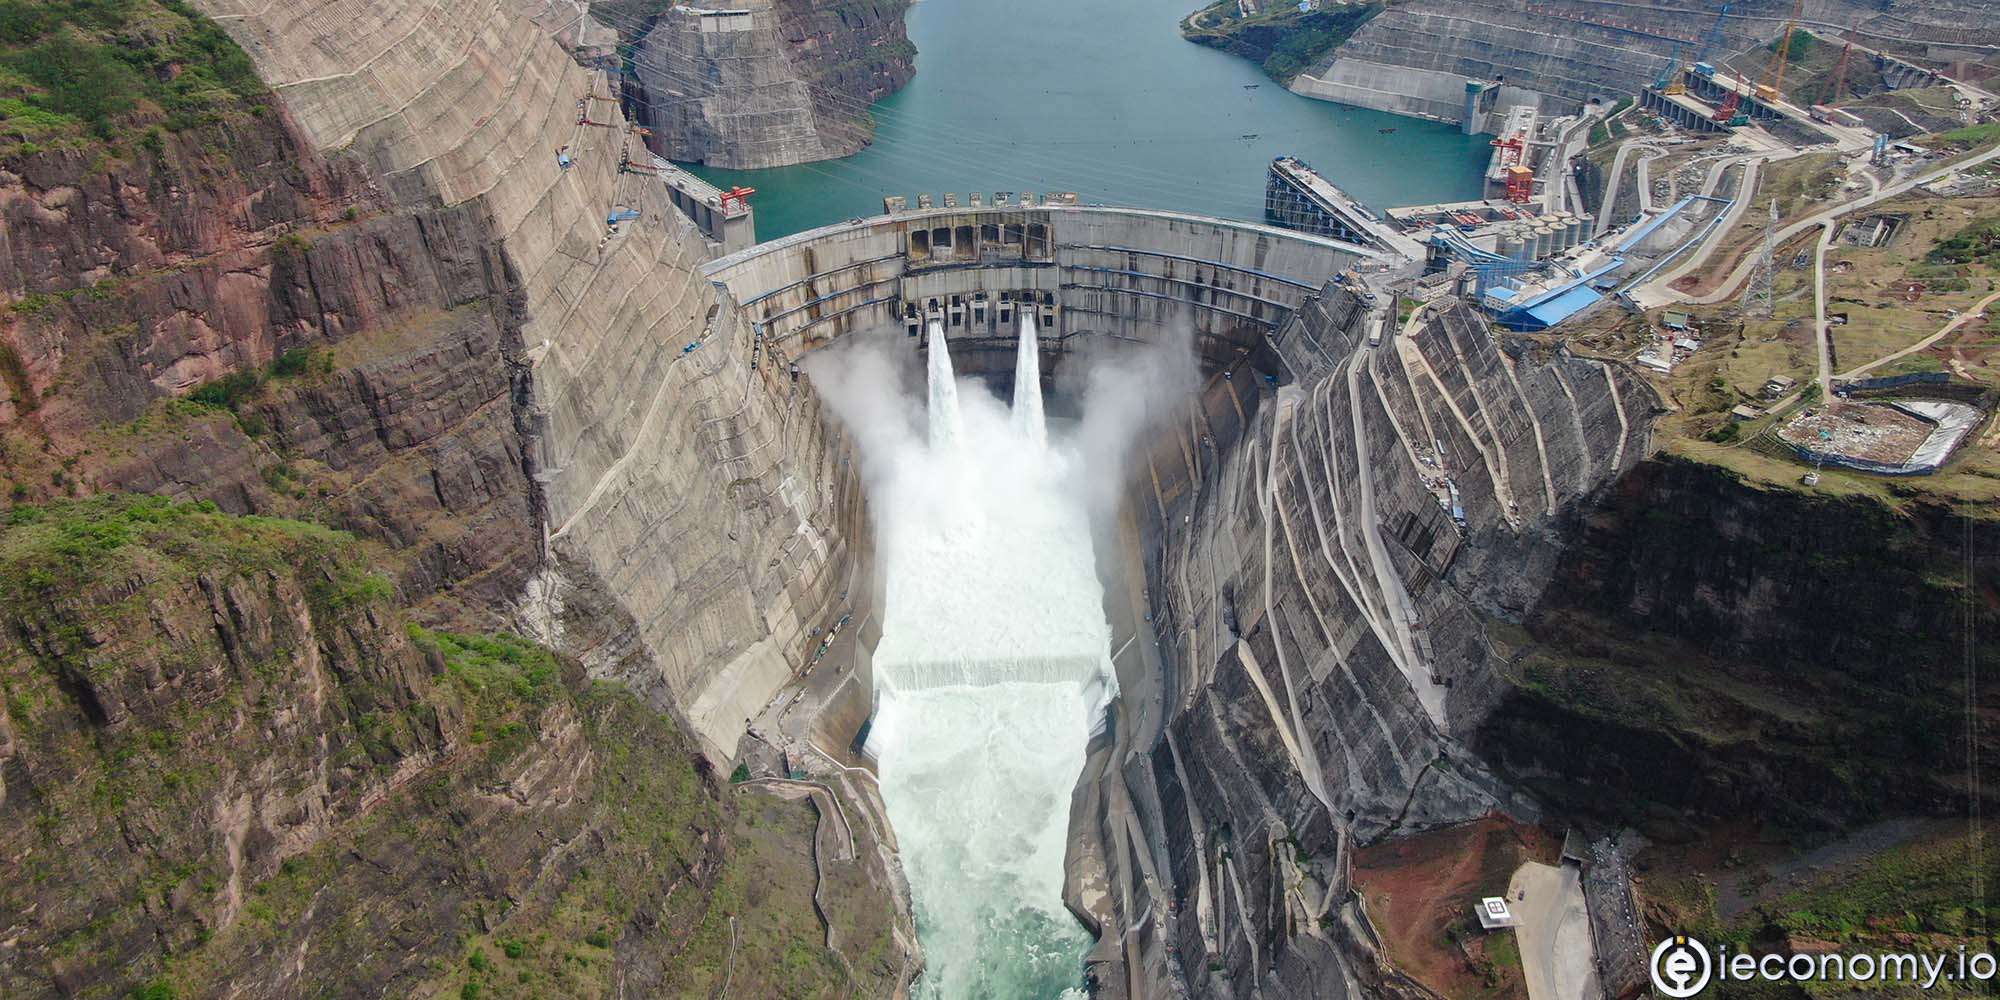 The world's second largest hydropower plant has opened in China